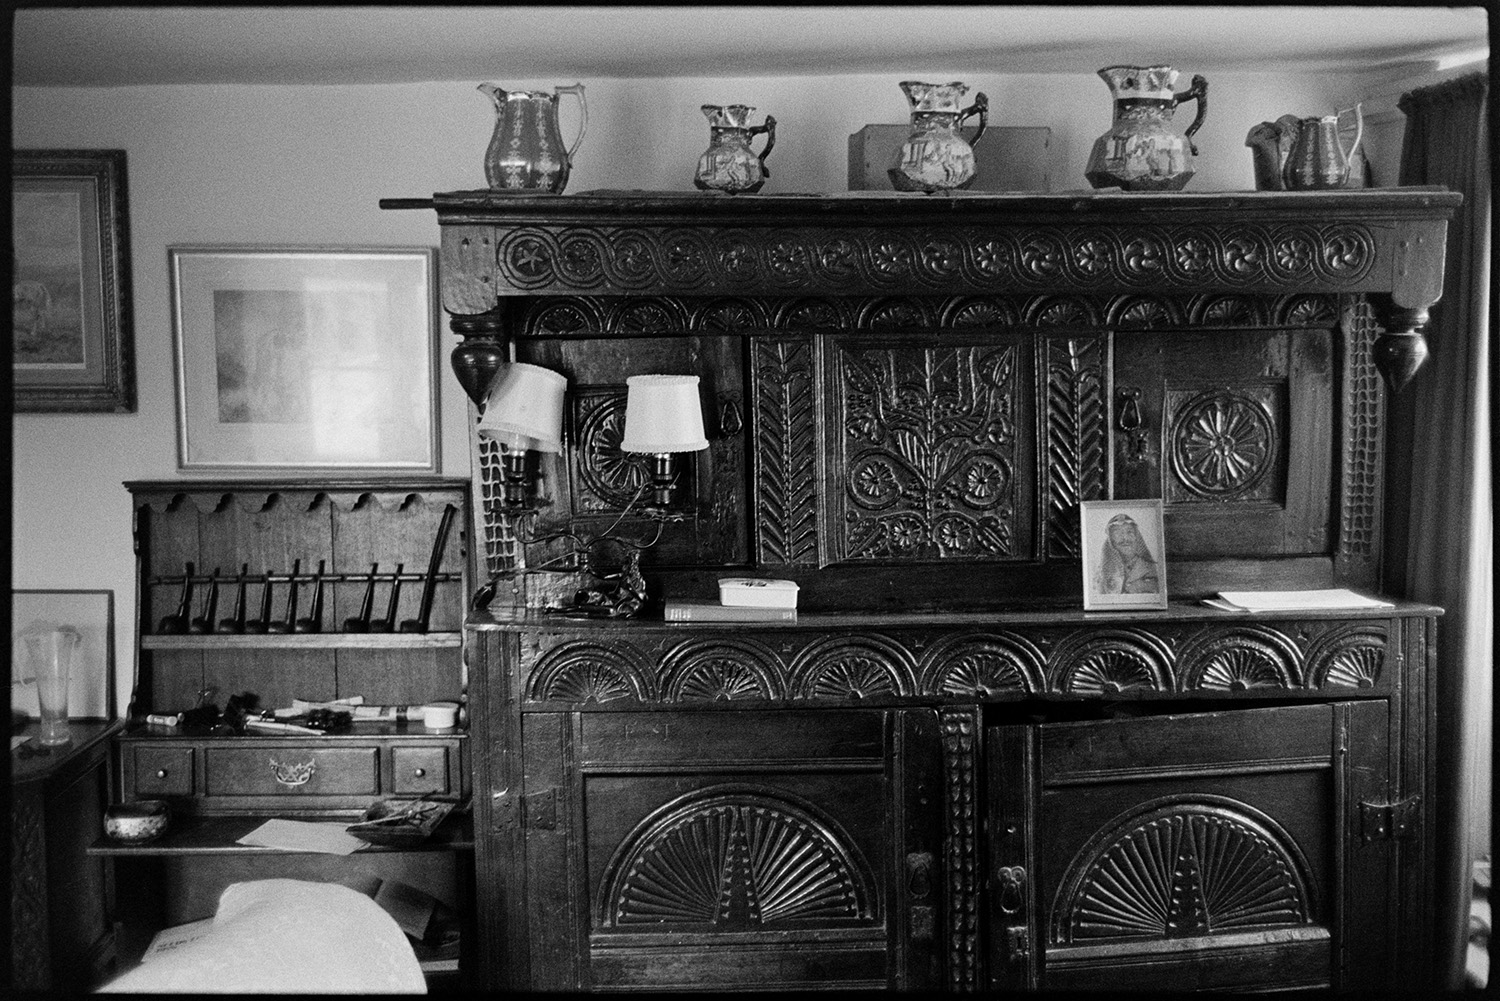 Furniture, carved dresser, jugs. 
[A room in a house in Brightly, Dolton with a carved wooden dresser and a writing desk. A lamp and jugs are displayed on the dresser. Pictures are also hung on the wall.]